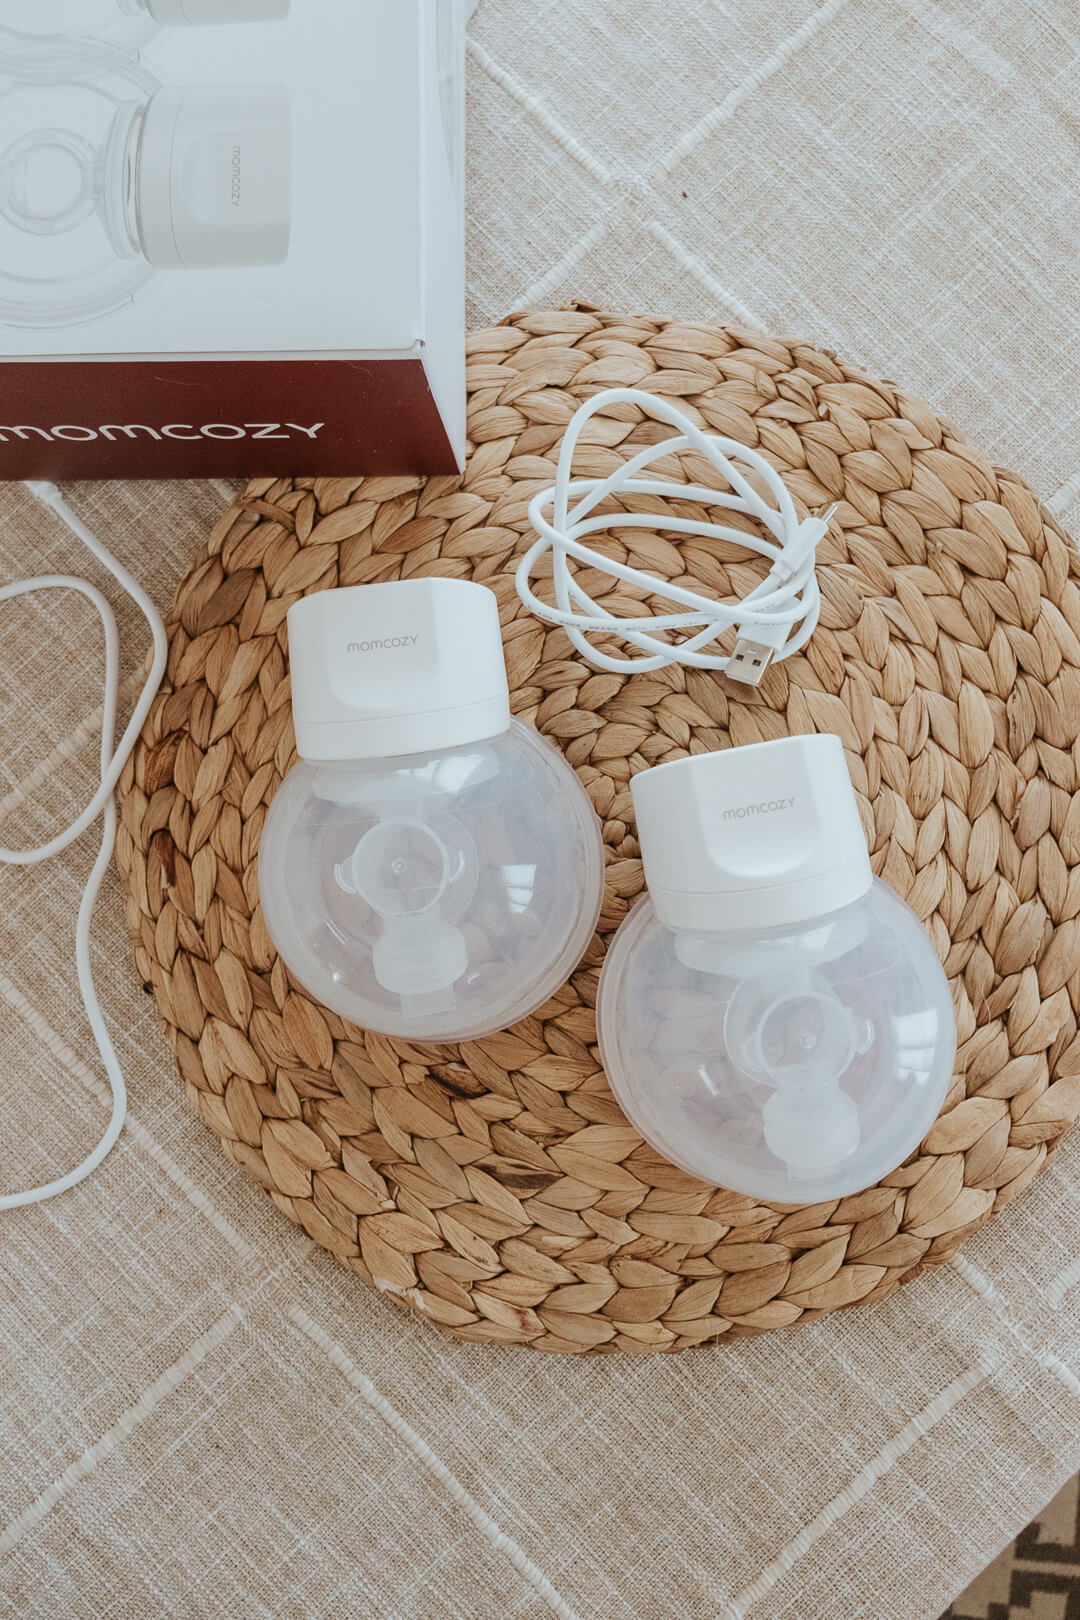 My Mom Cozy Breast Pump Review